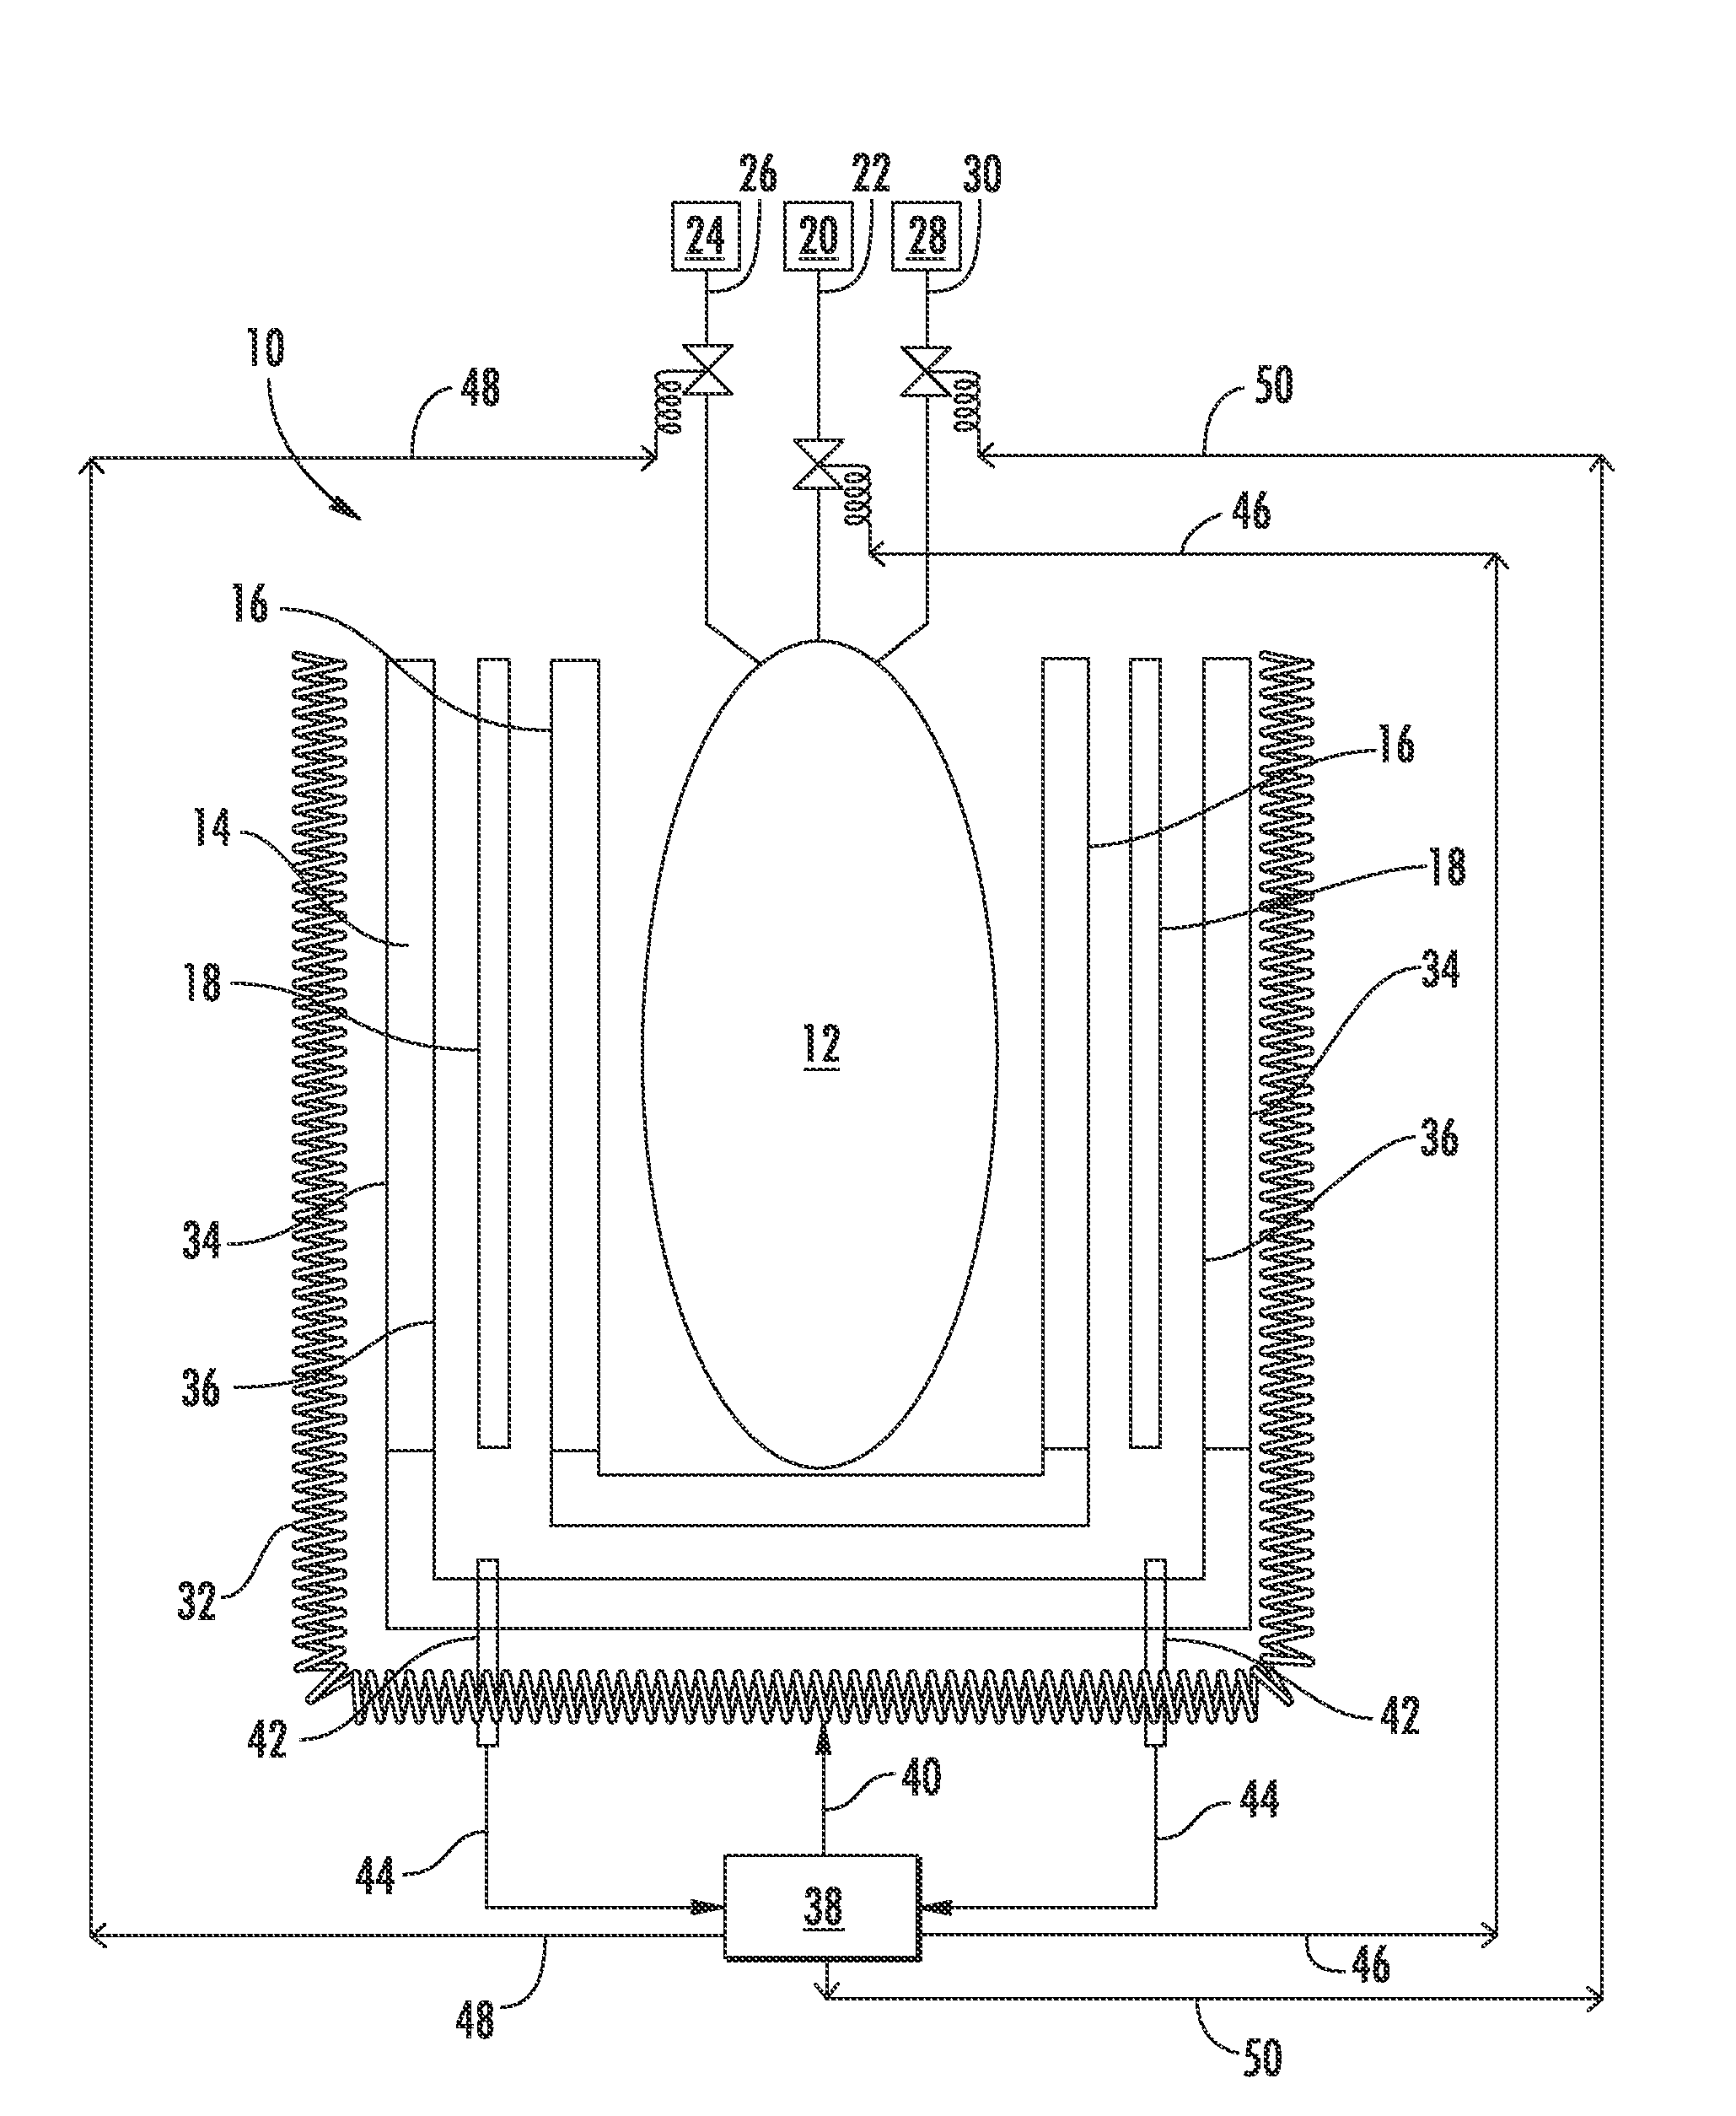 Method for operating a gasifier